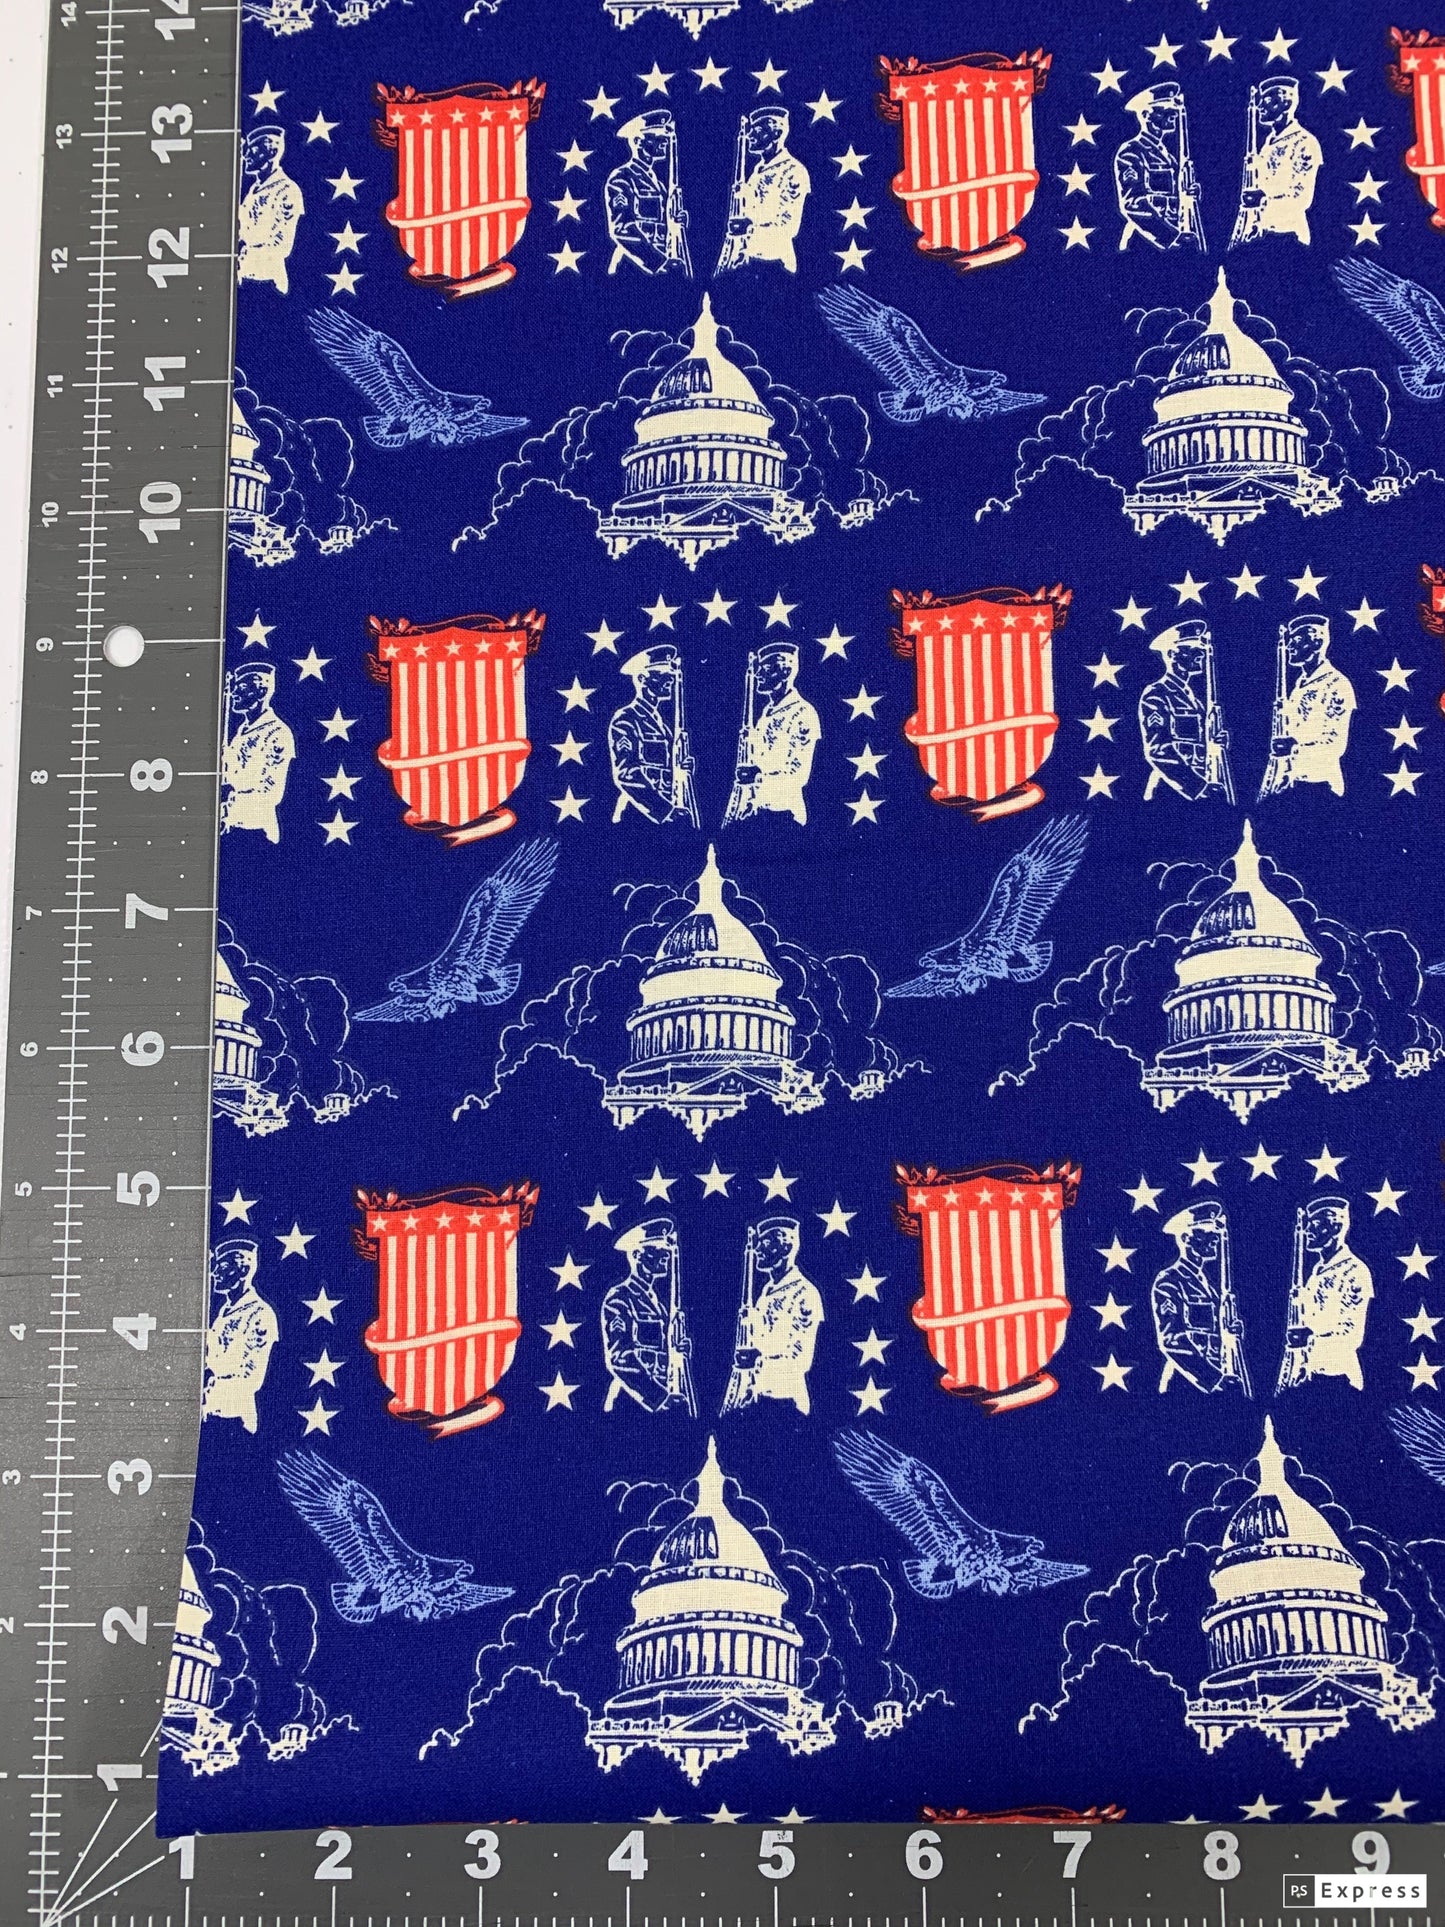 Capitol fabric 49535 Made in the USA Patriotic cotton fabric